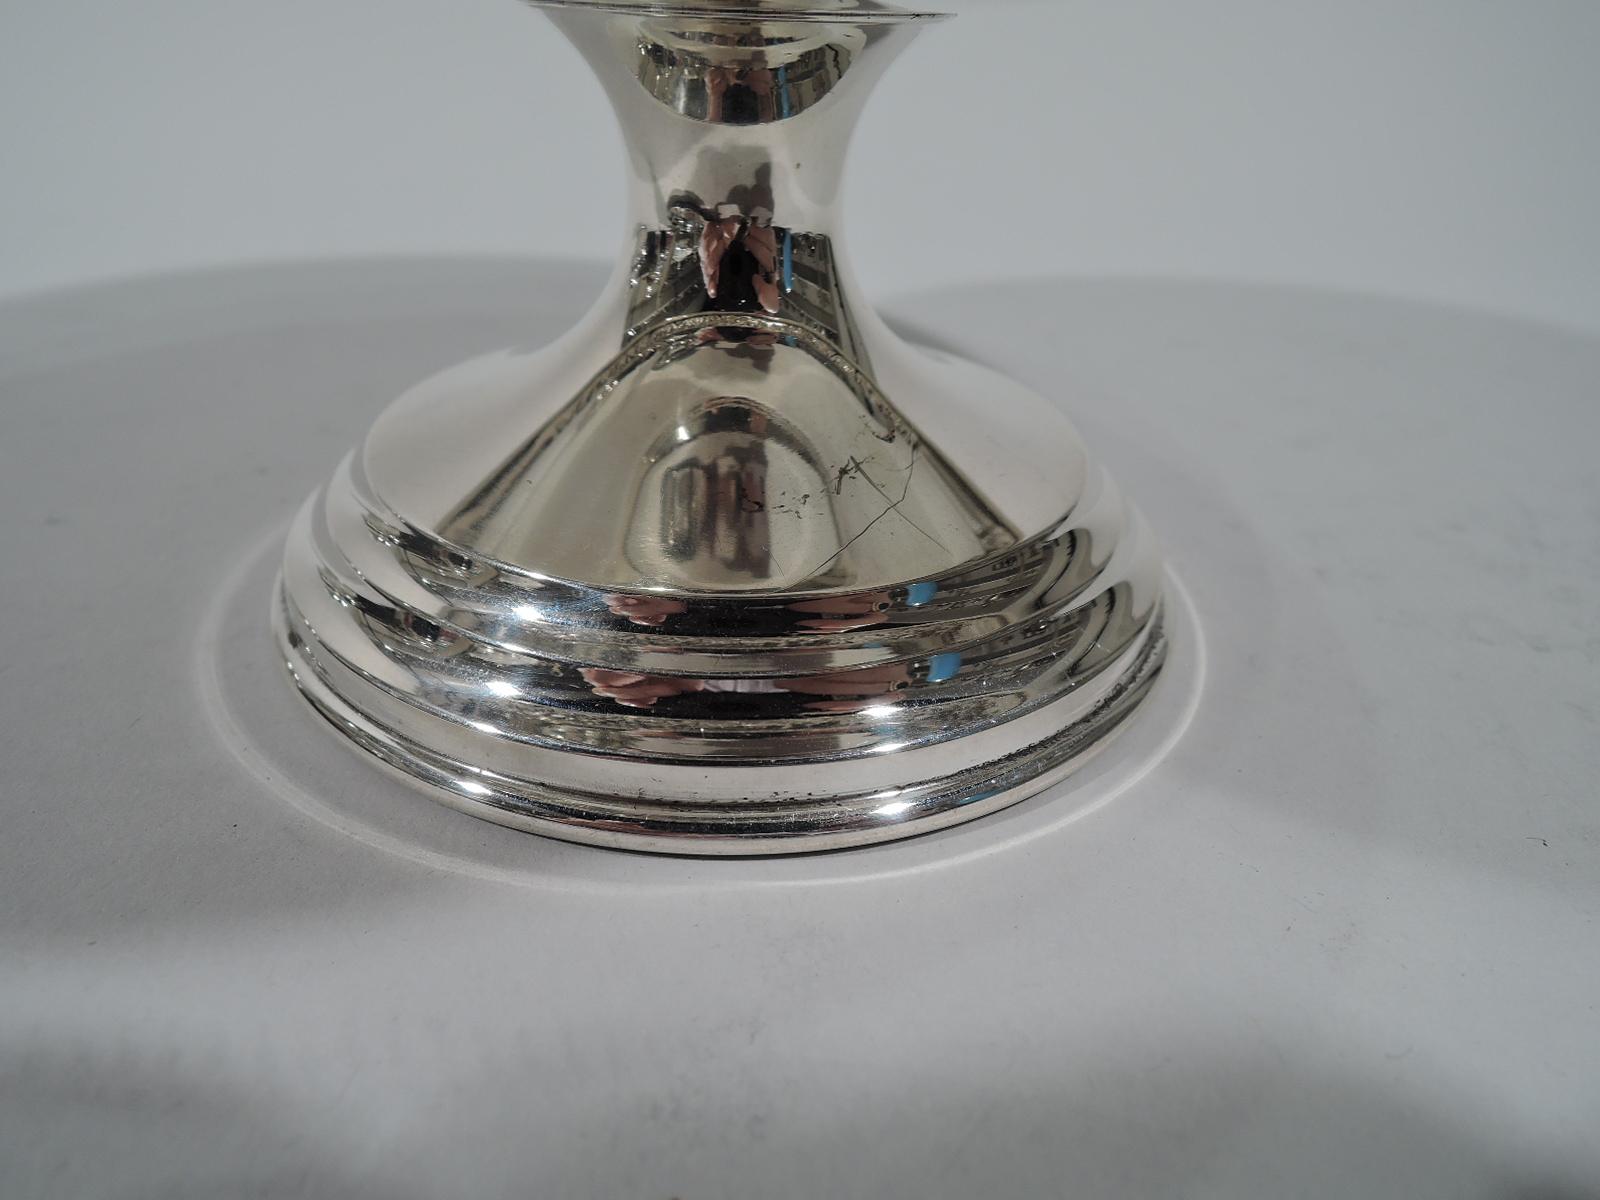 American Old Fashioned Baltimore Repousse Sterling Silver Compote by Kirk